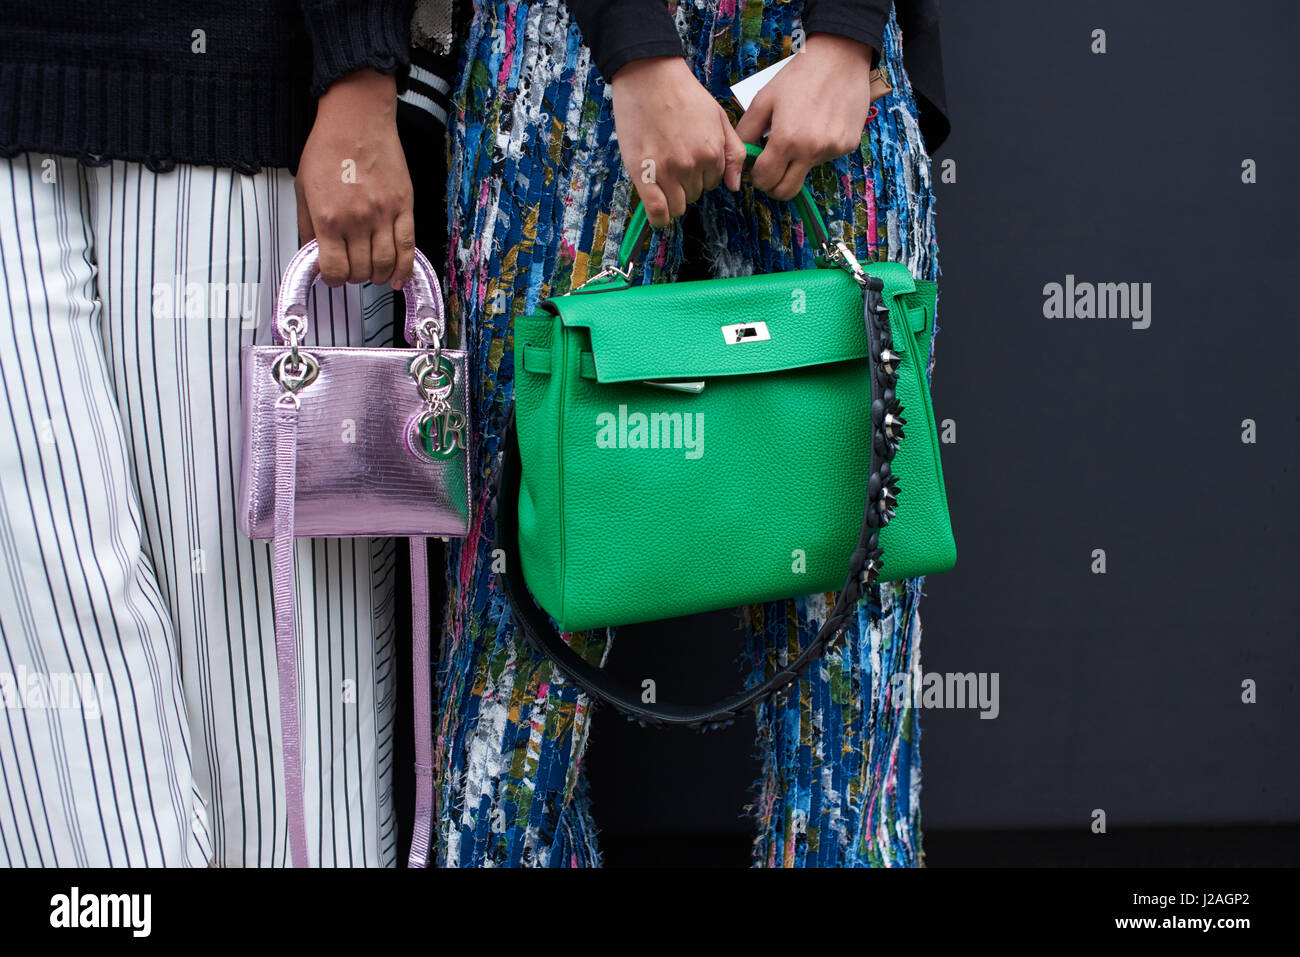 LONDON - FEBRUARY, 2017: Mid section of two women standing in a street holding designer handbags, a large green Hermes bag, and a small metallic Dior bag, during London Fashion Week, horizontal, front view Stock Photo